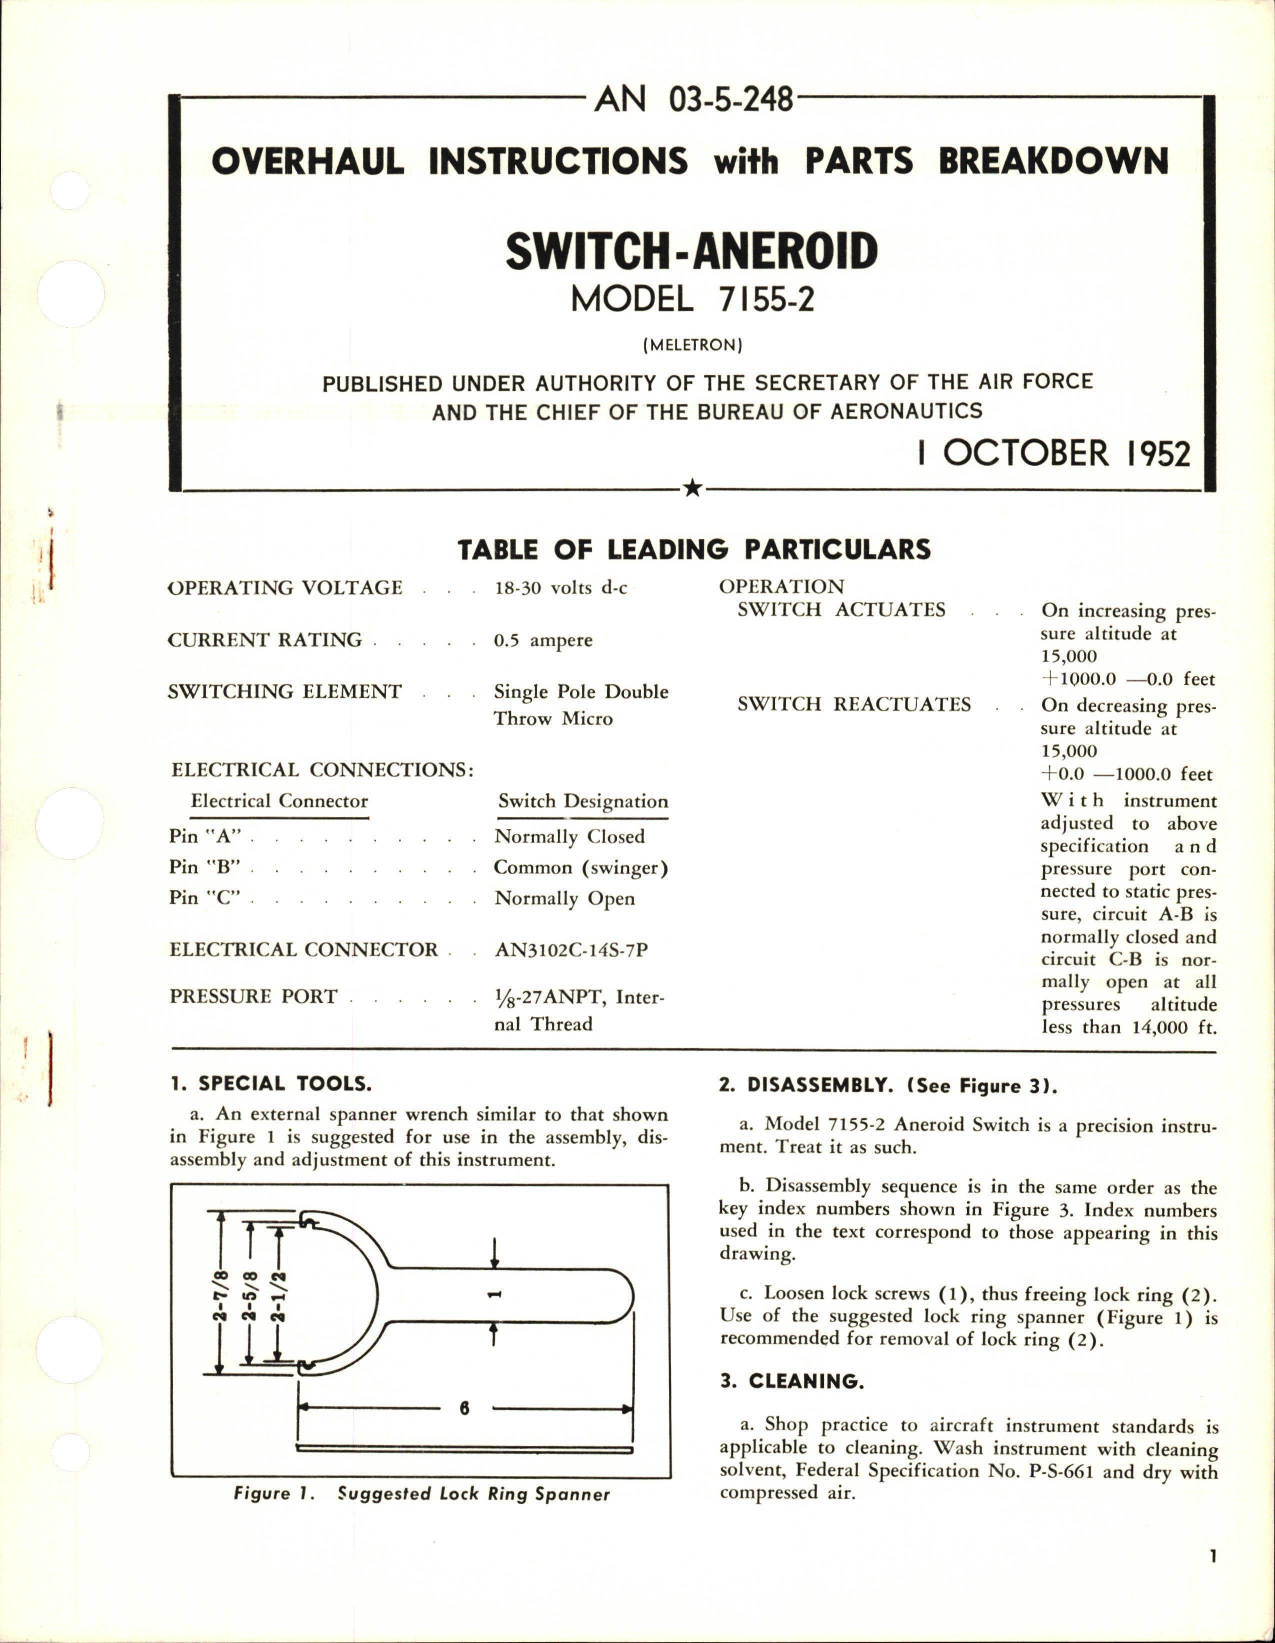 Sample page 1 from AirCorps Library document: Overhaul Instructions with Parts Breakdown for Aneroid Switch - Model 7155-2